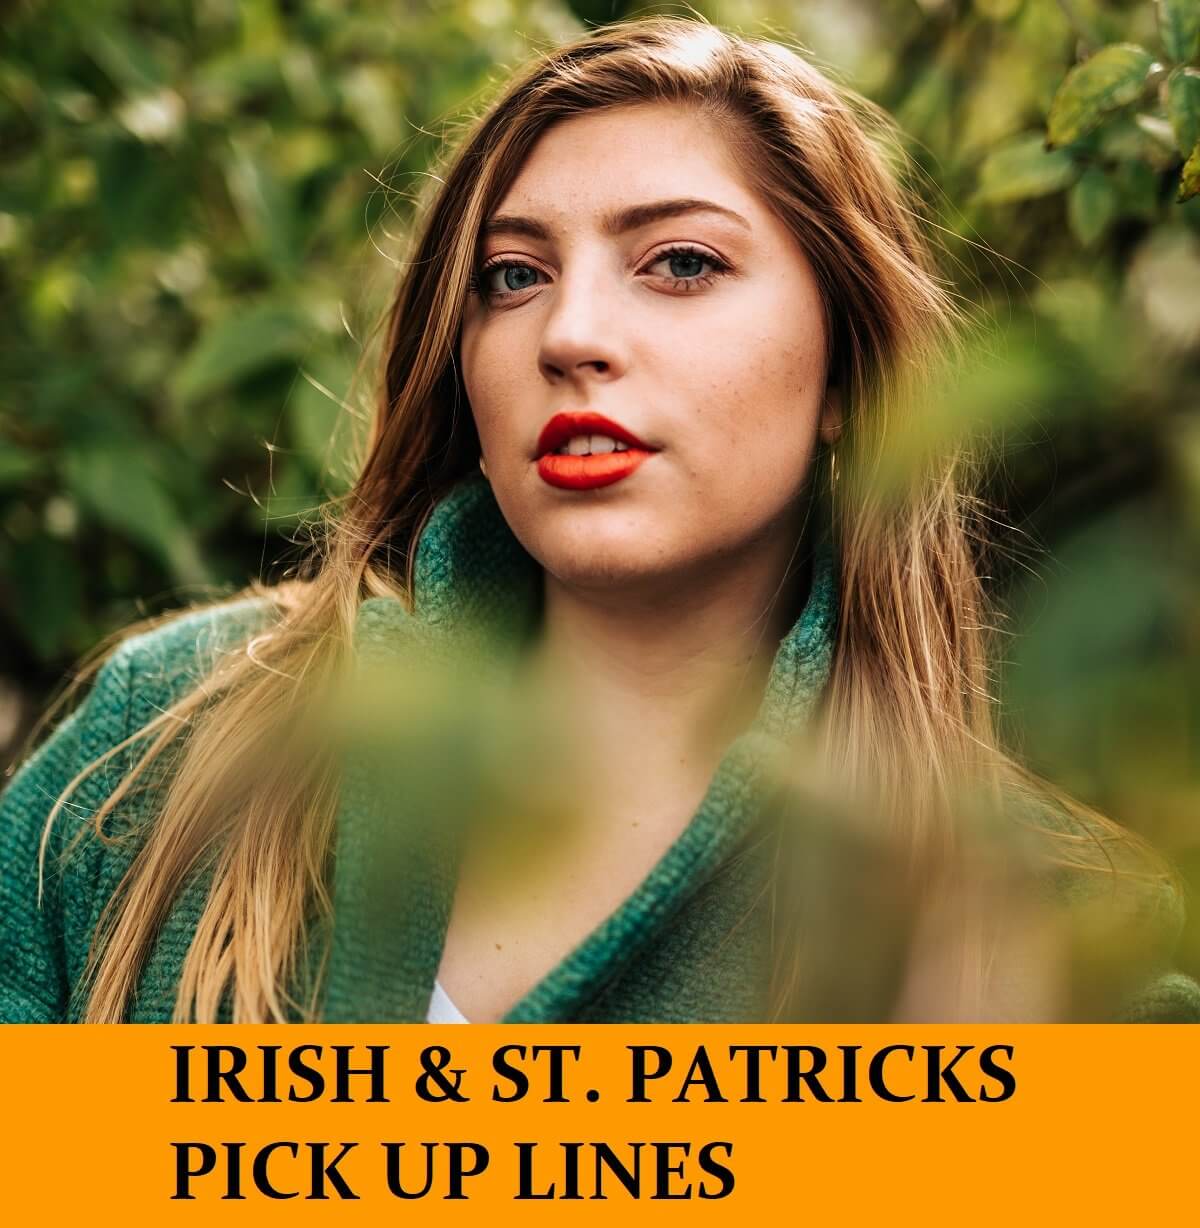 Pick Up Lines for Irish and St. Patricks Day